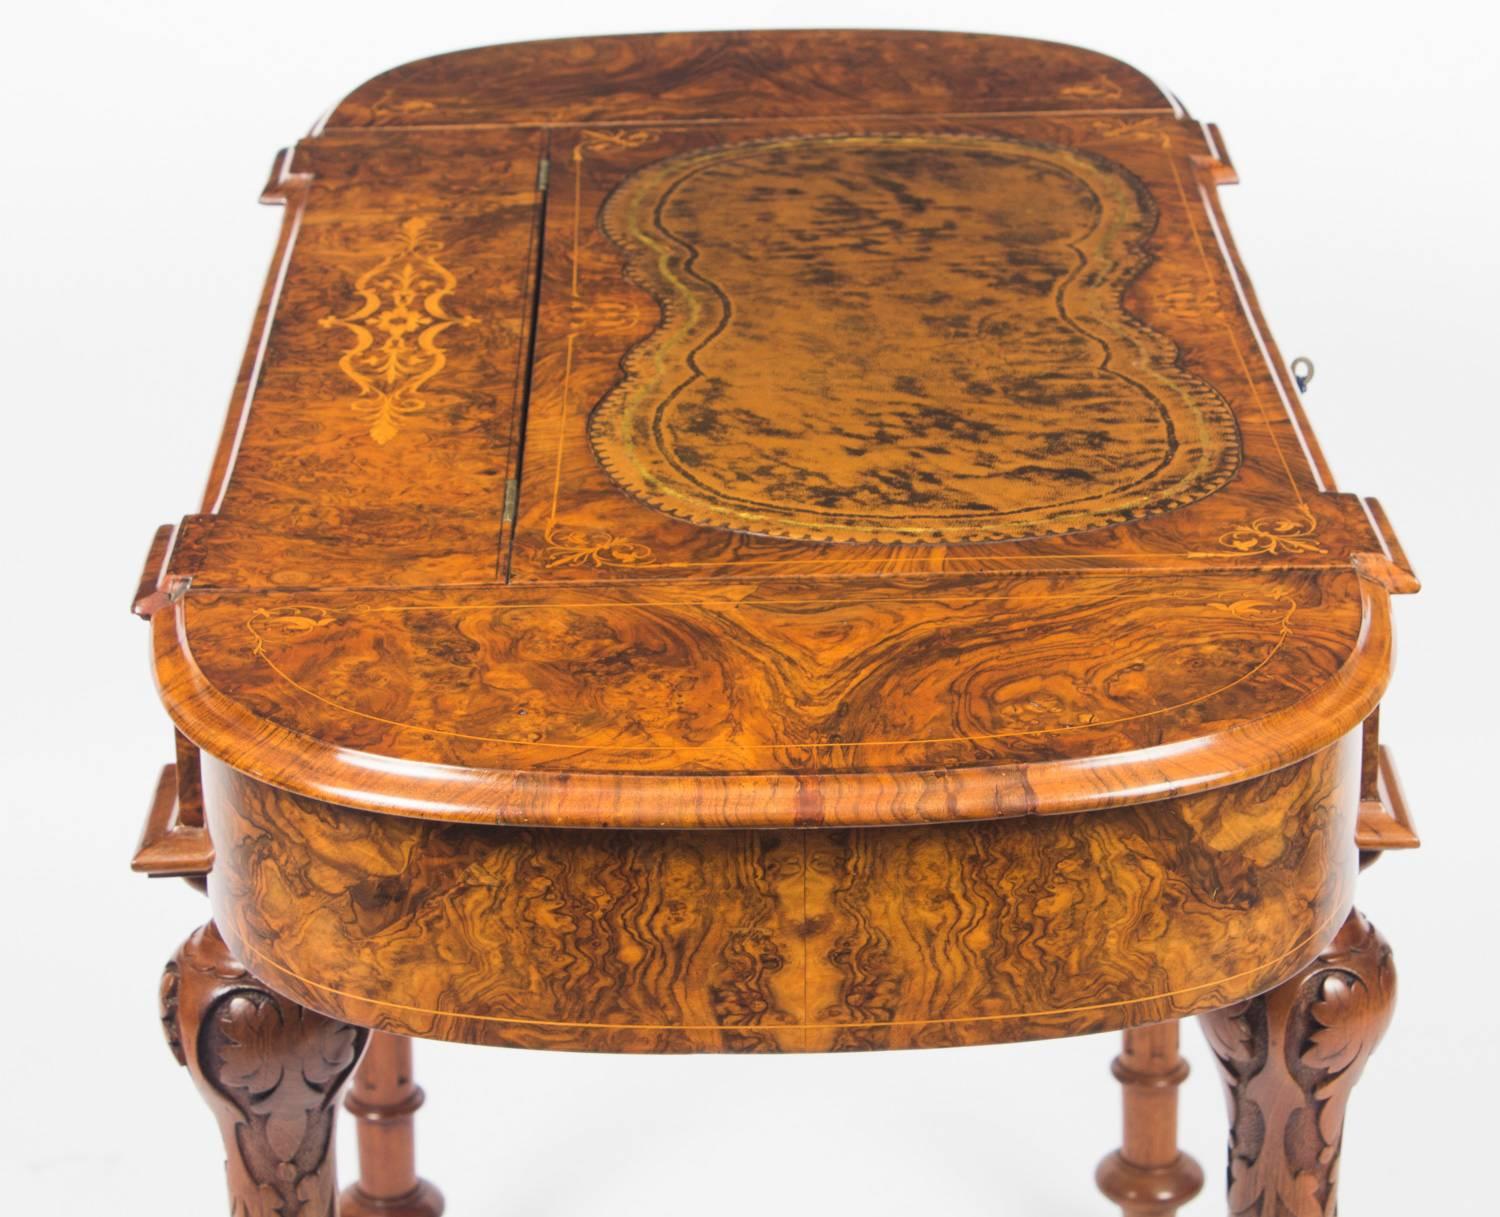 English Antique Burr Walnut and Marquetry Writing Table Desk, 19th Century